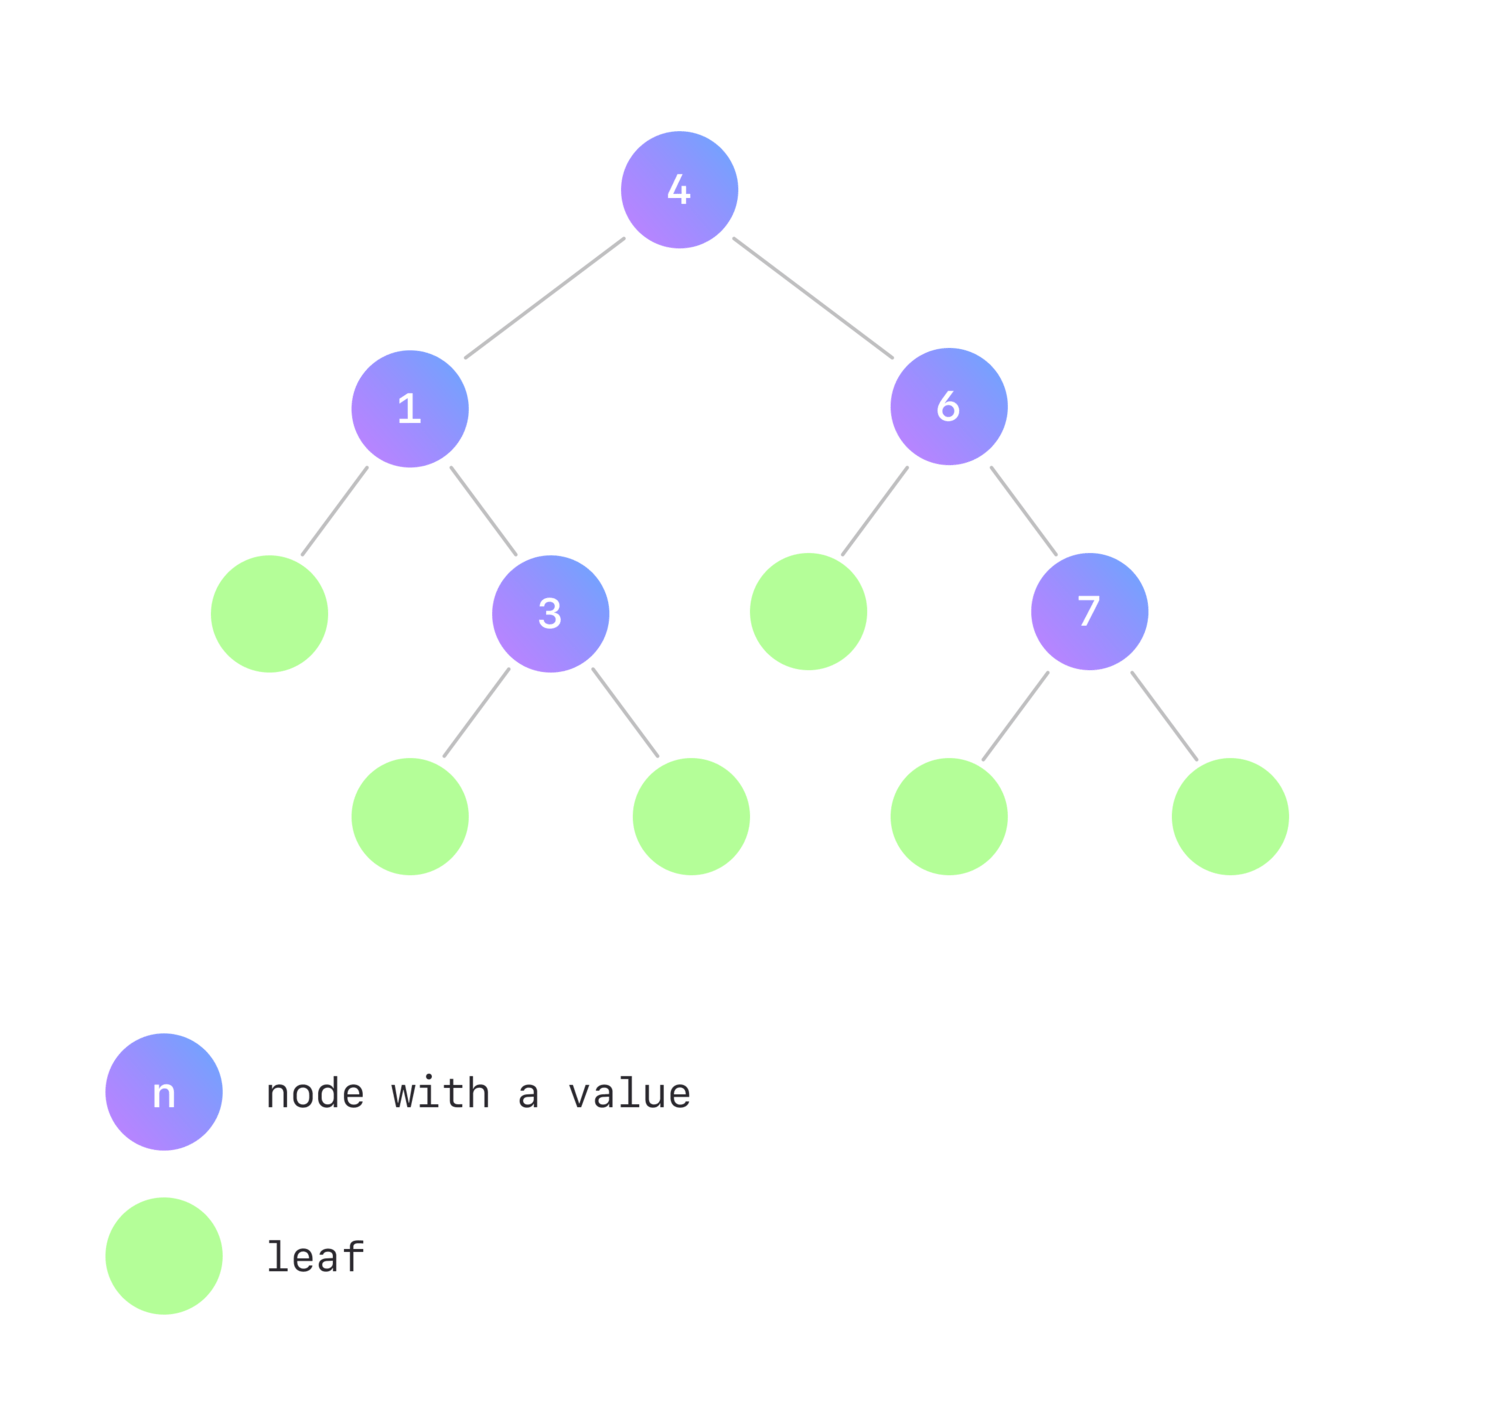 Binary search tree for the integer numbers